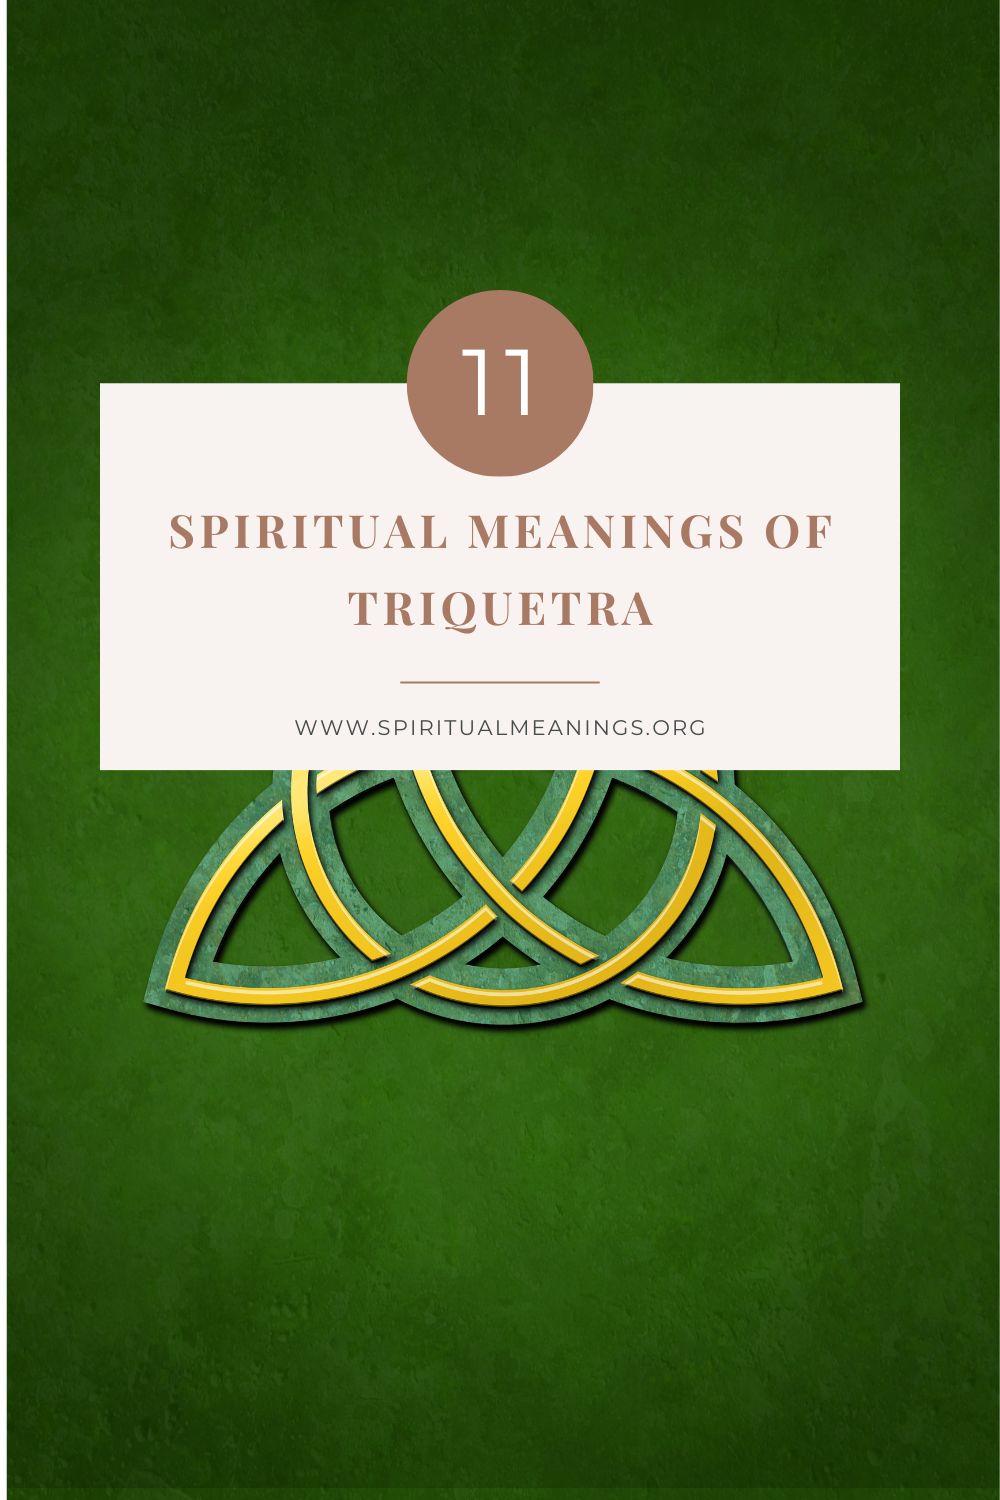 11 Spiritual Meanings of Triquetra pin 2